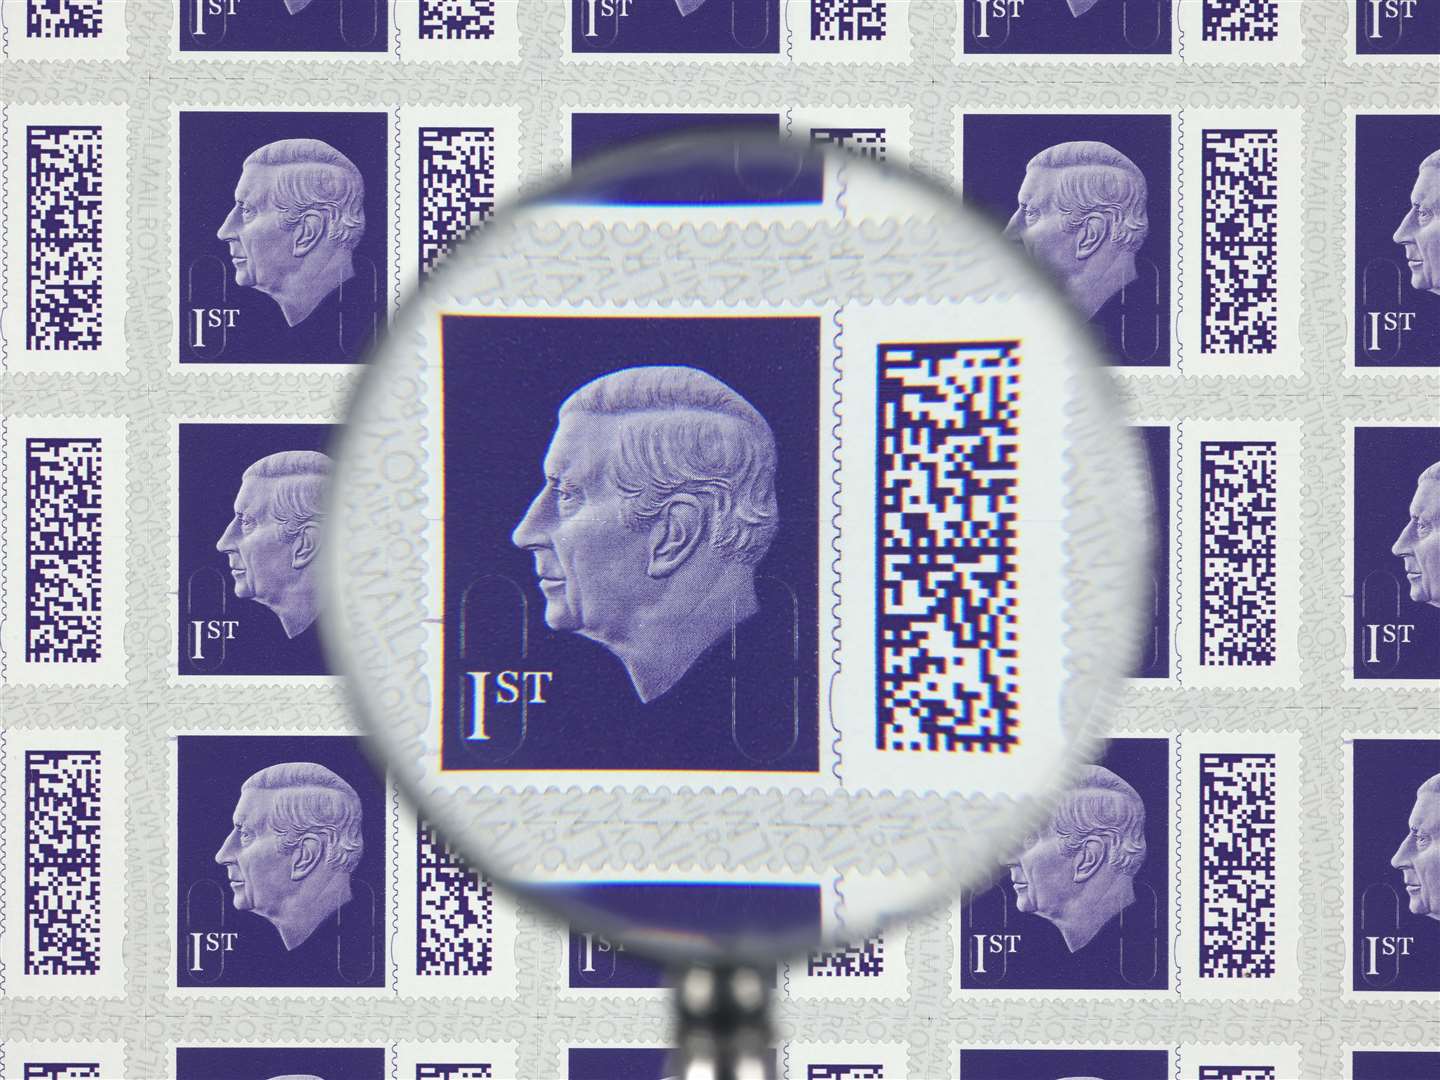 How new everyday stamps will look using the portrait of King Charles